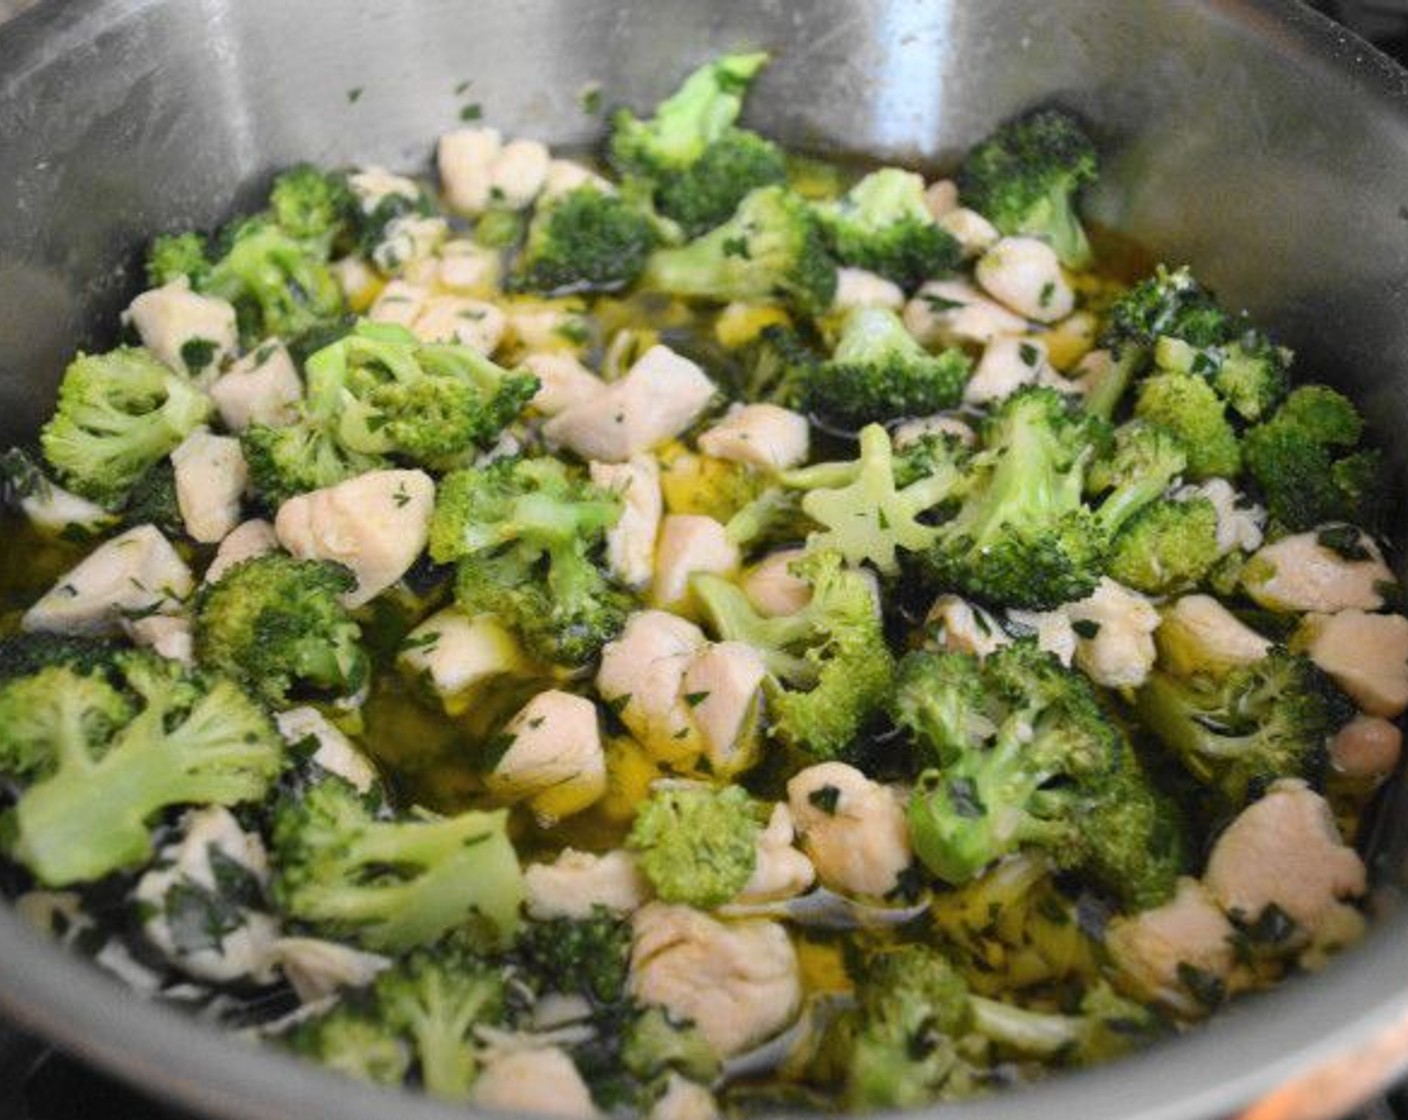 step 10 Take the broccoli out of the oven at this point and add it to the aglio olio sauce, along with the chicken chunks. Let all of the flavors meld together on low for another 15 minutes.